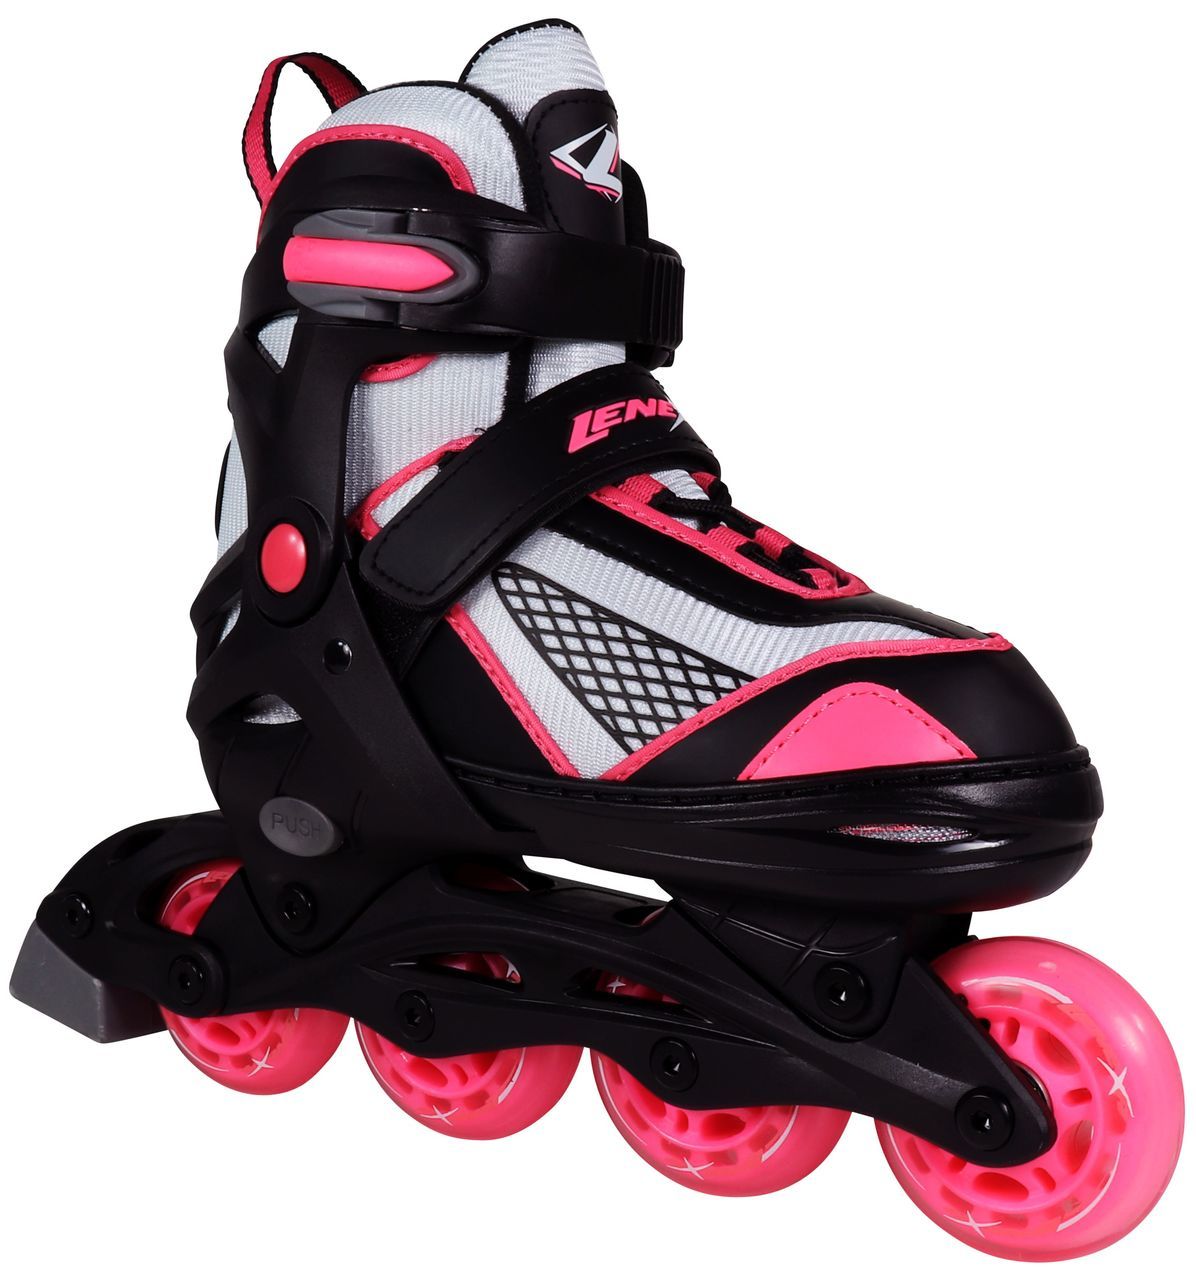 Roller Skating Market In-Depth Profiling With Key Players and Recent Developments and Forecast Period by 2024 | Rollerblade, Powerslide, Sena